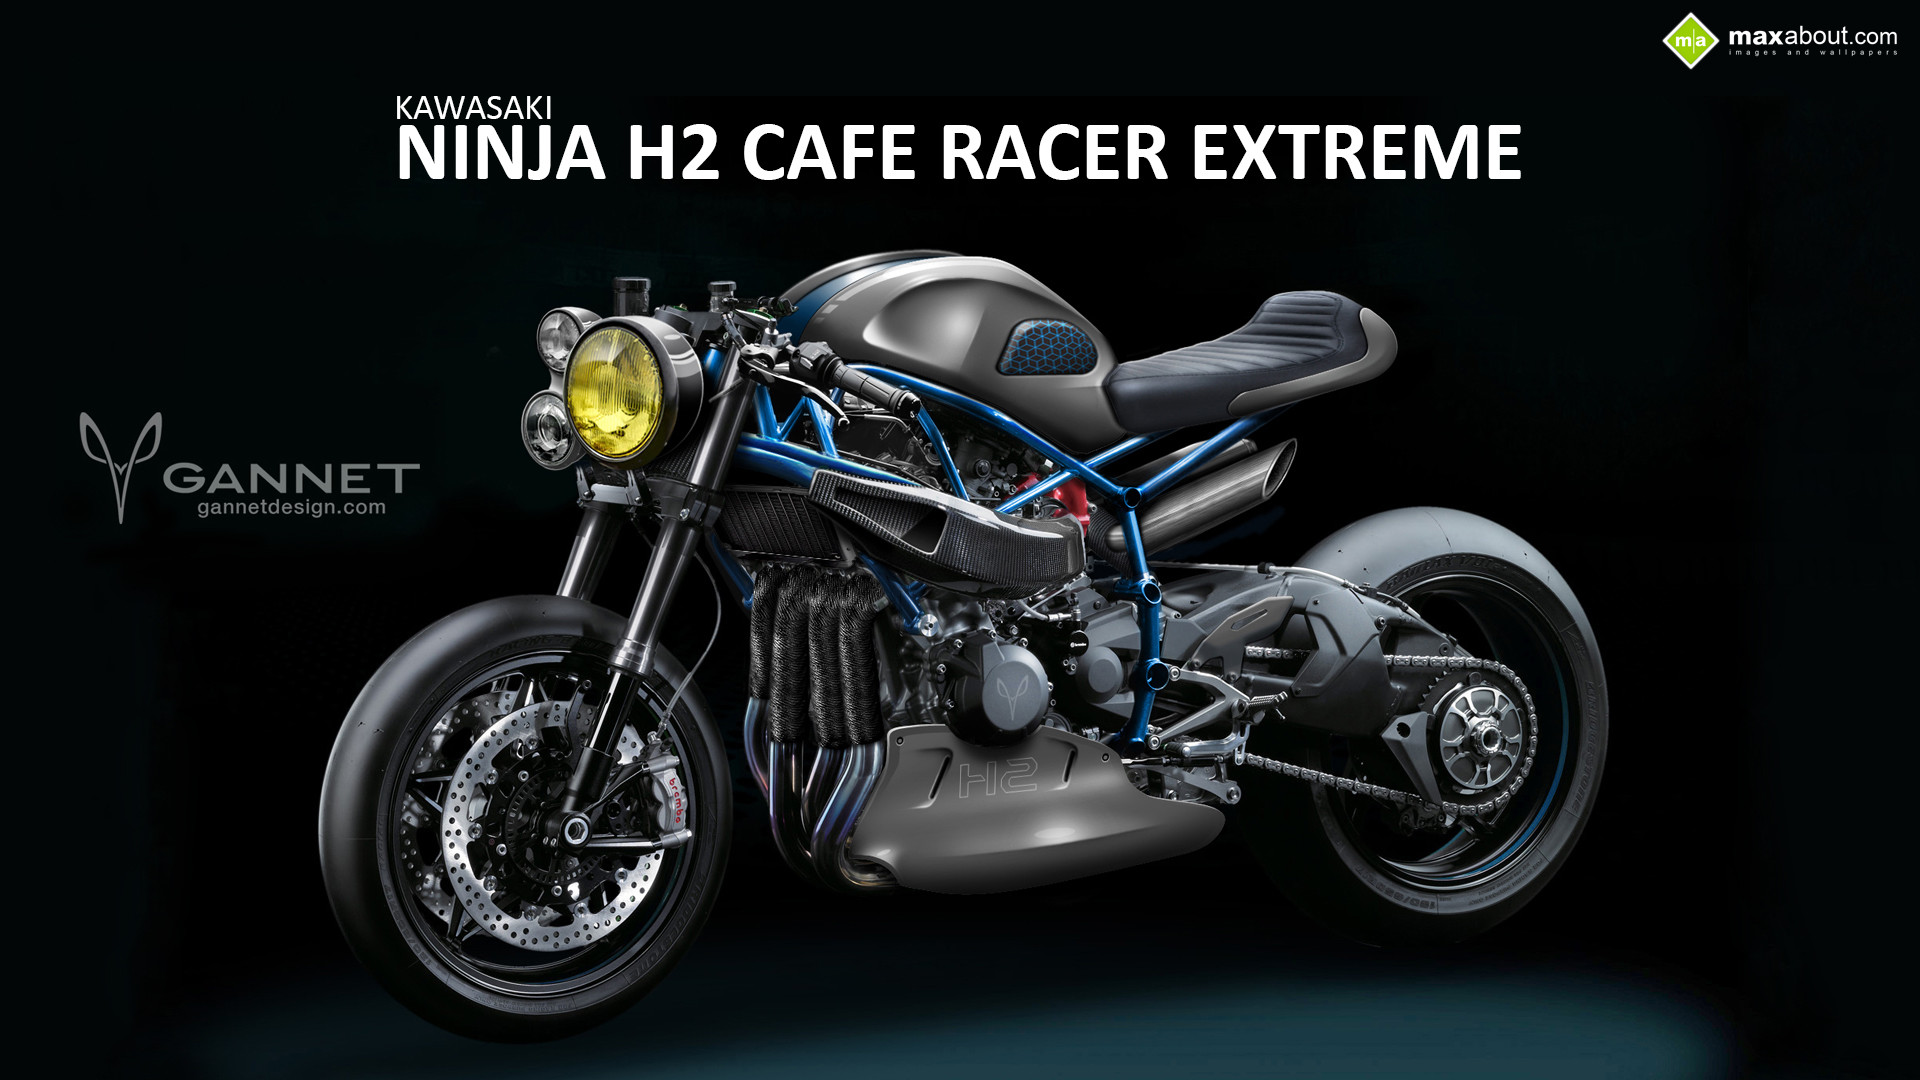 1920x1080 Kawasaki Ninja H2 CafÃ© Racer Extreme is a concept bike designed by Ulfert  Janssen of Gannet Designs. The naked cafe-racer has received an  eye-catching blue ...